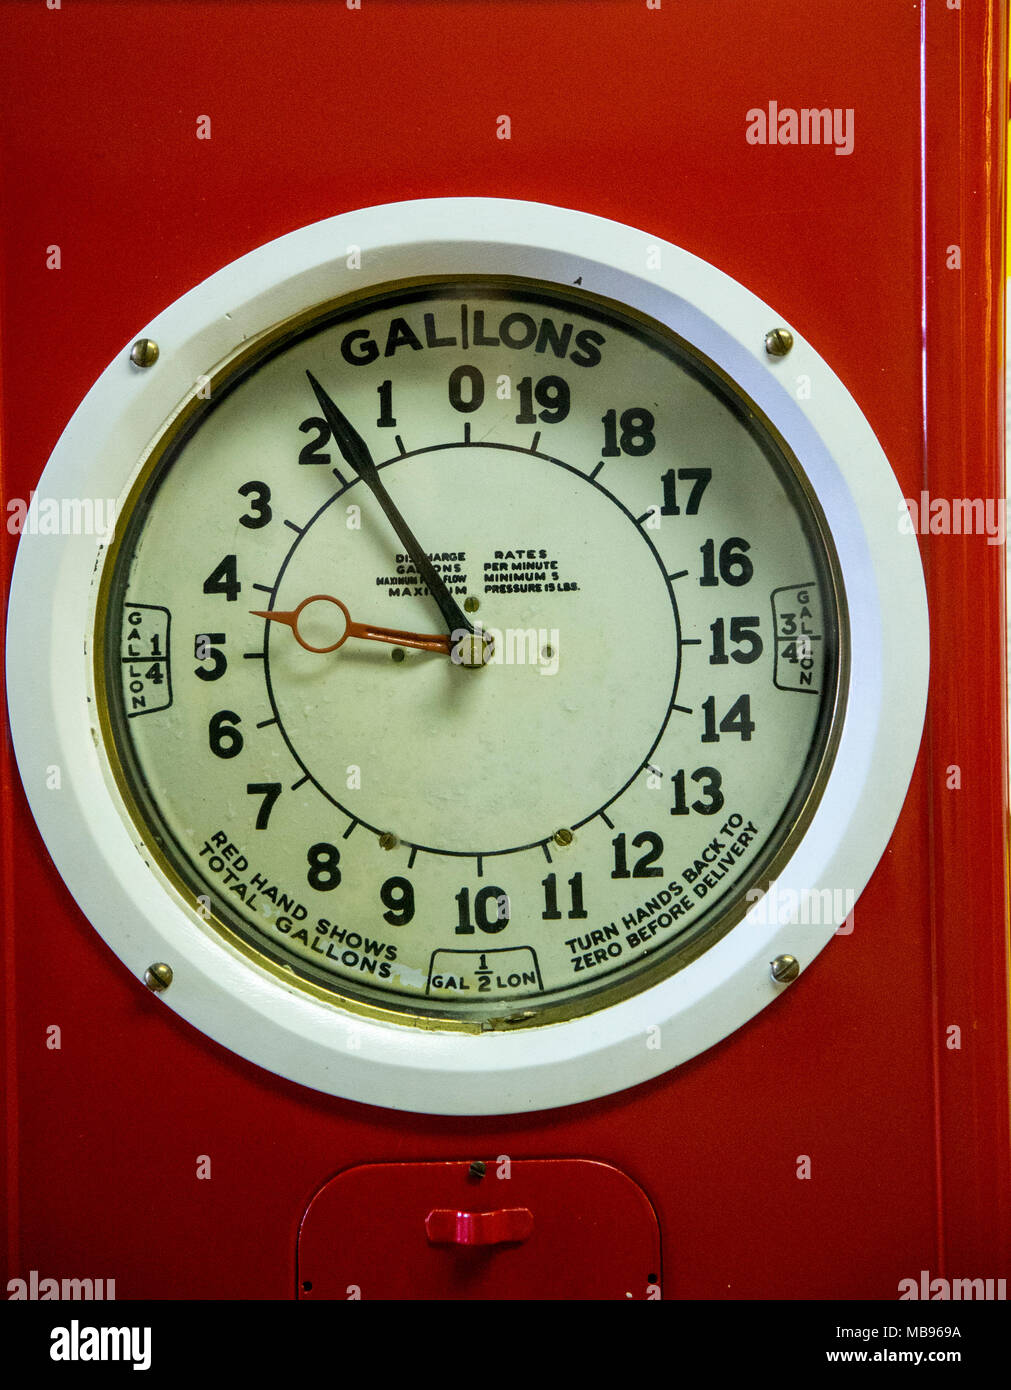 Gallons pumped dial on a vintage gas pump at the Paterson Museum in Paterson, NJ Stock Photo